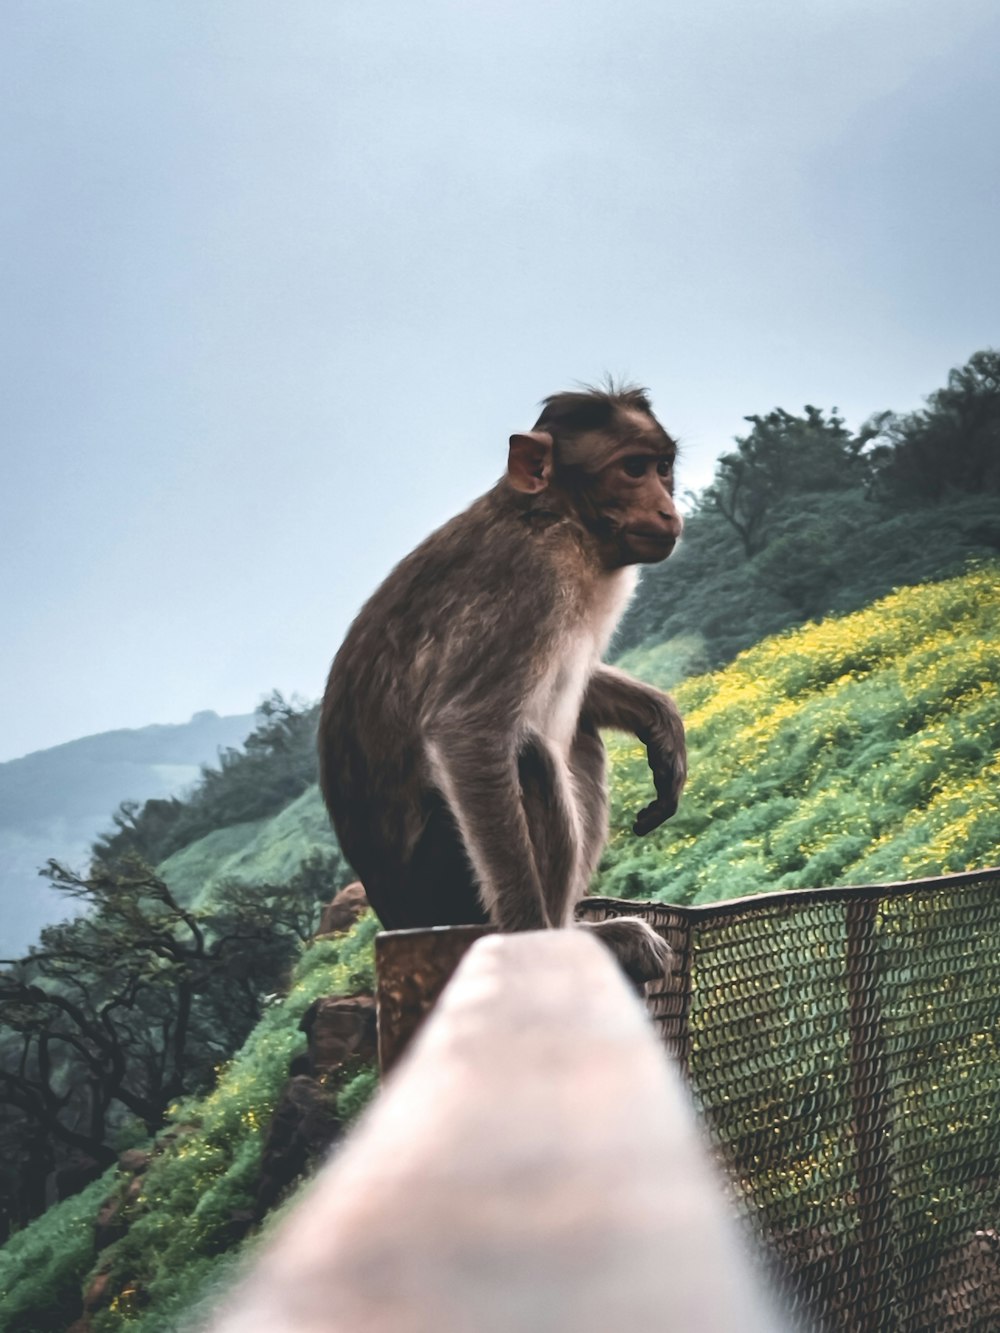 a monkey standing on a fence